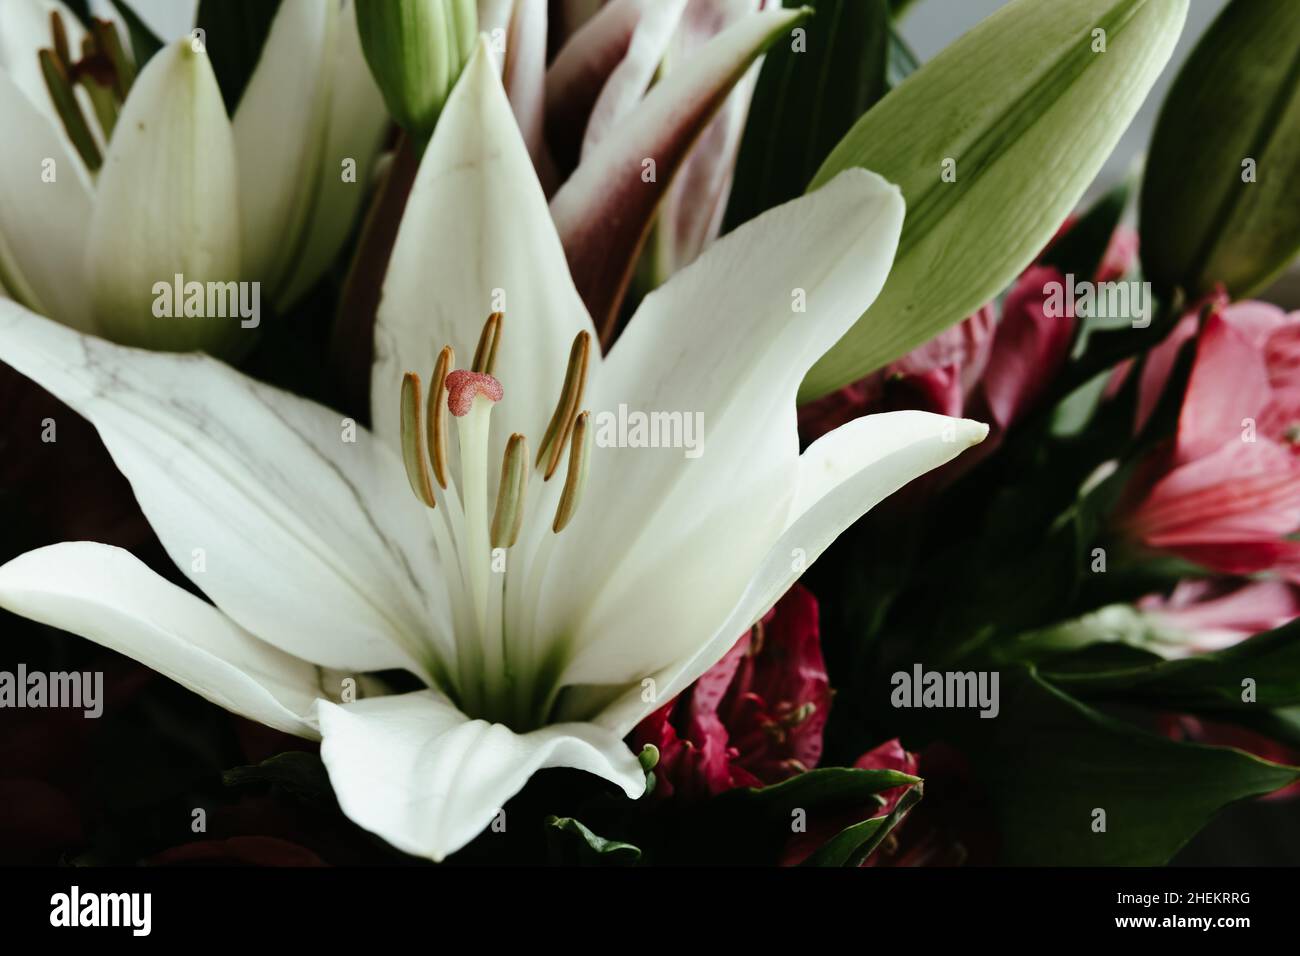 Fresh lily and pink alstroemeria flower bouquet on a dark wood background with copy space Stock Photo